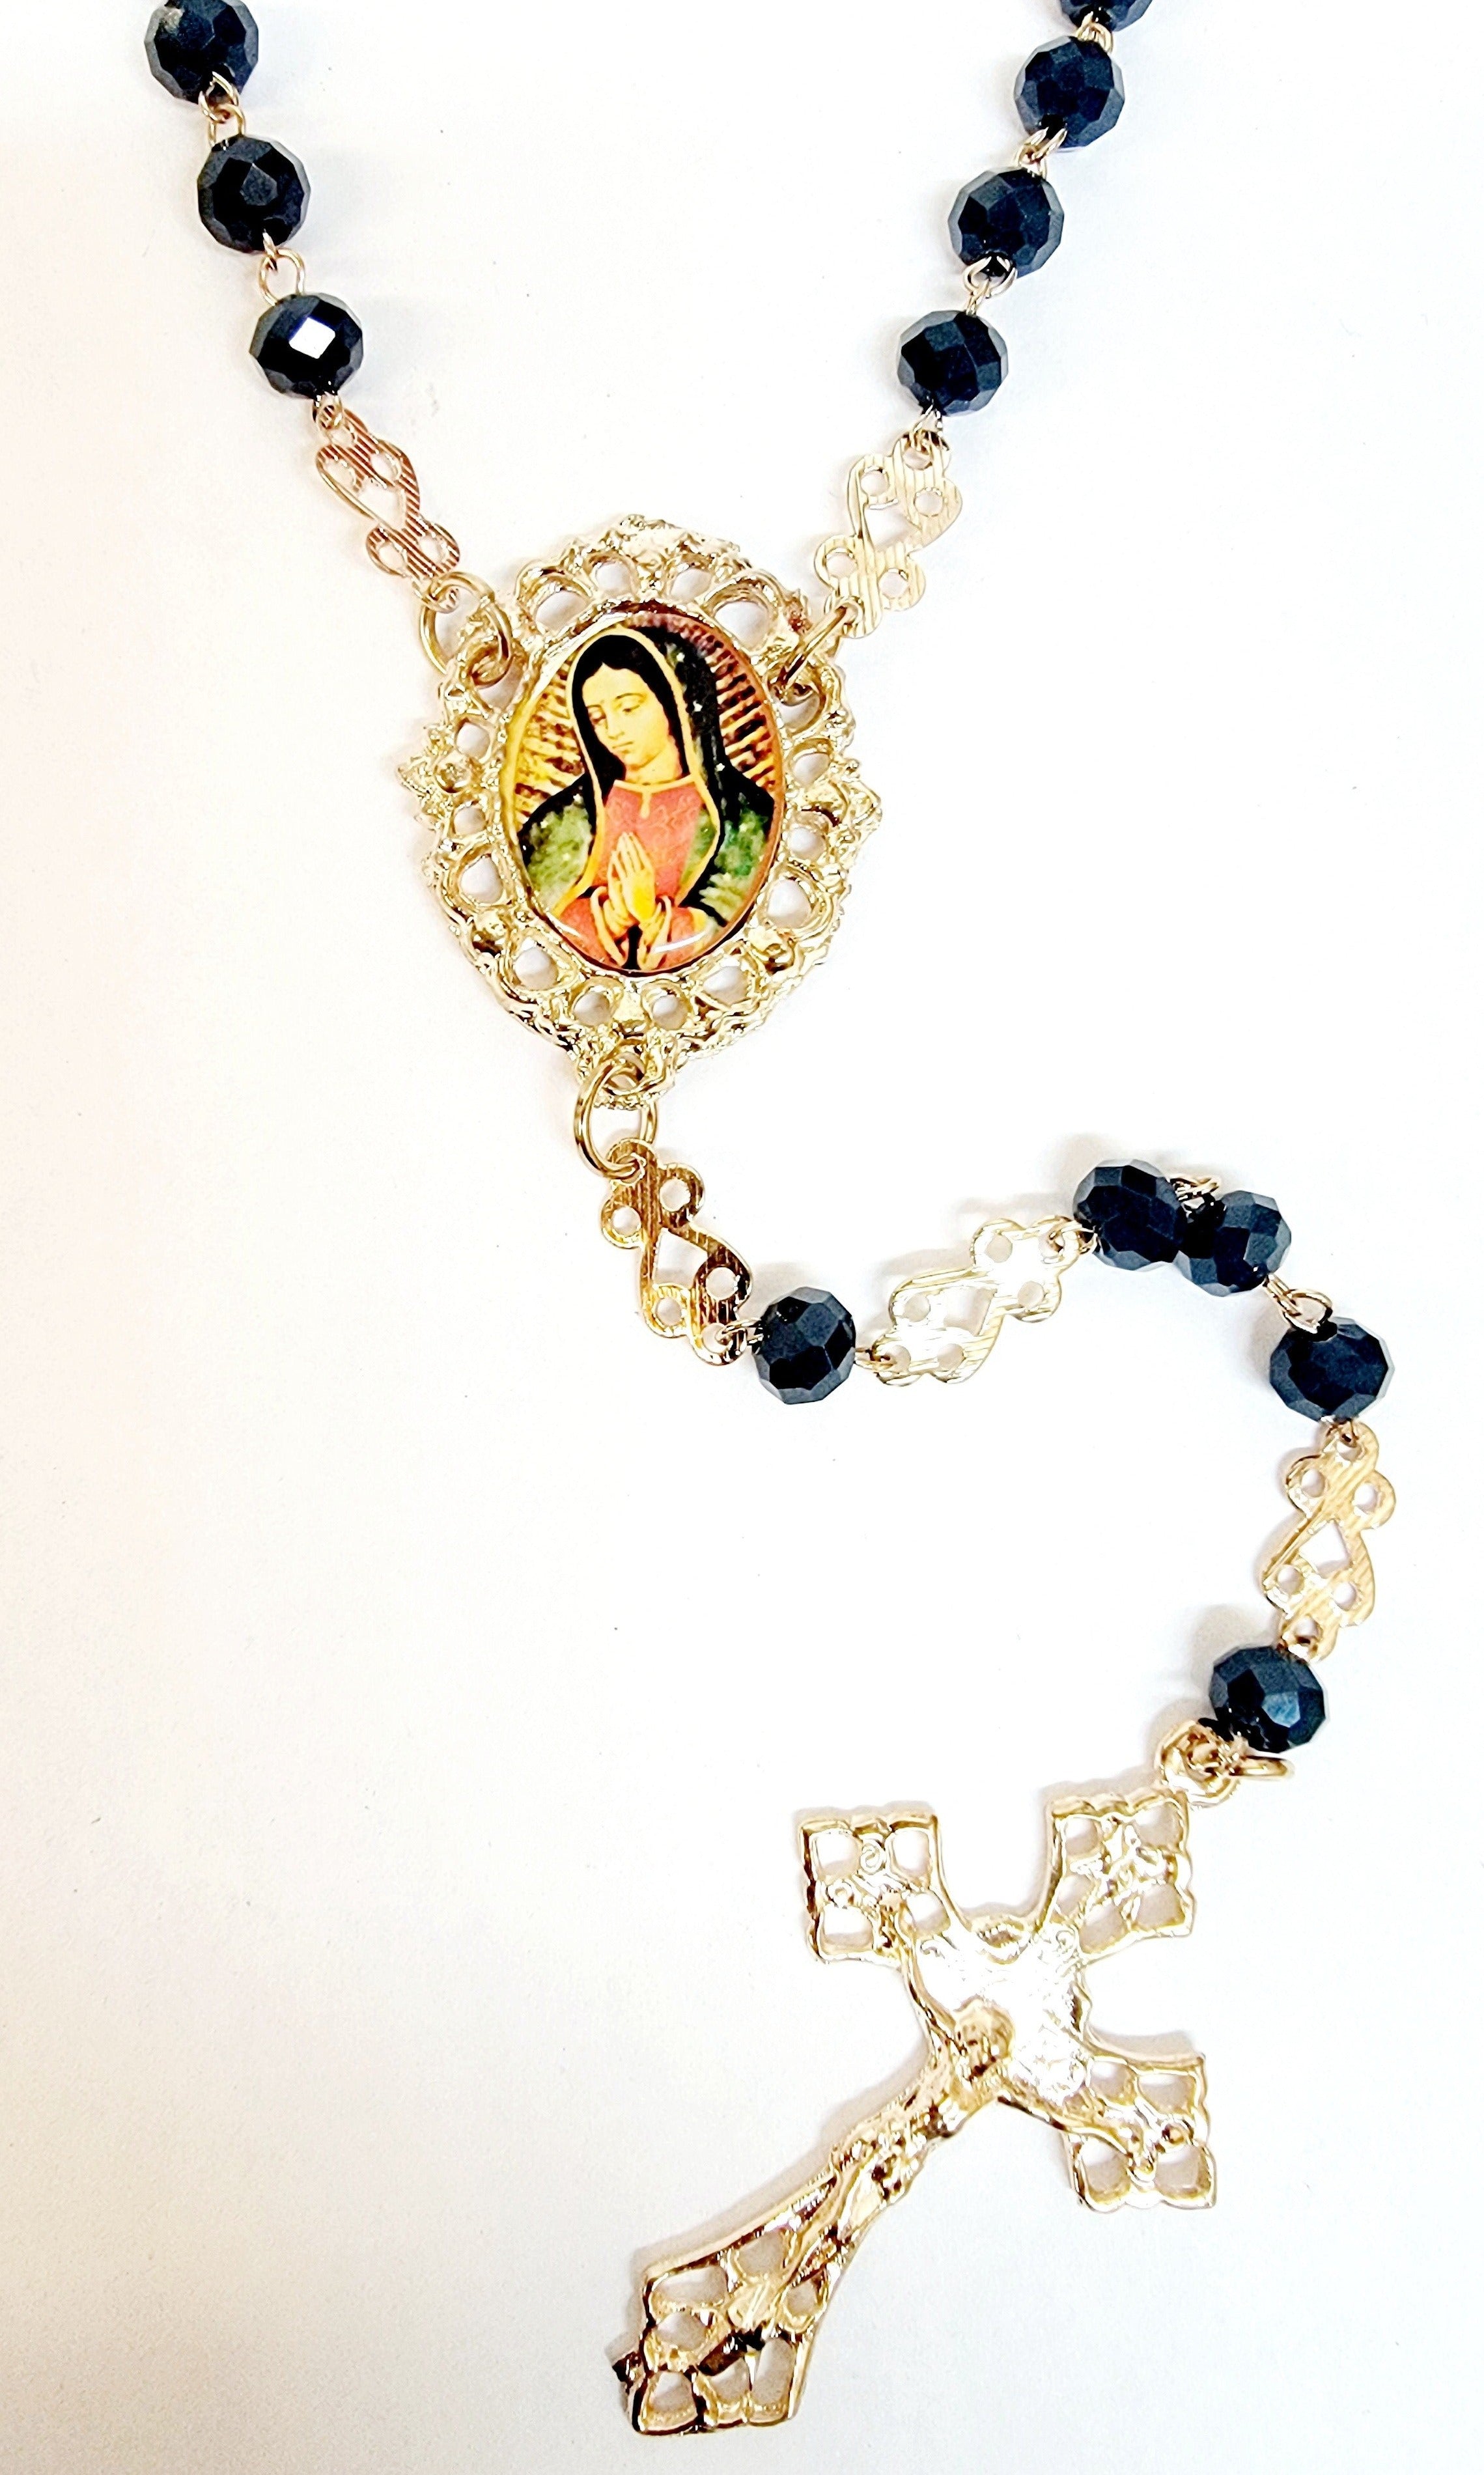 Our Lady of Guadalupe with Our Lady of Sorrows Crystal Dark Midnight Blue Rosary